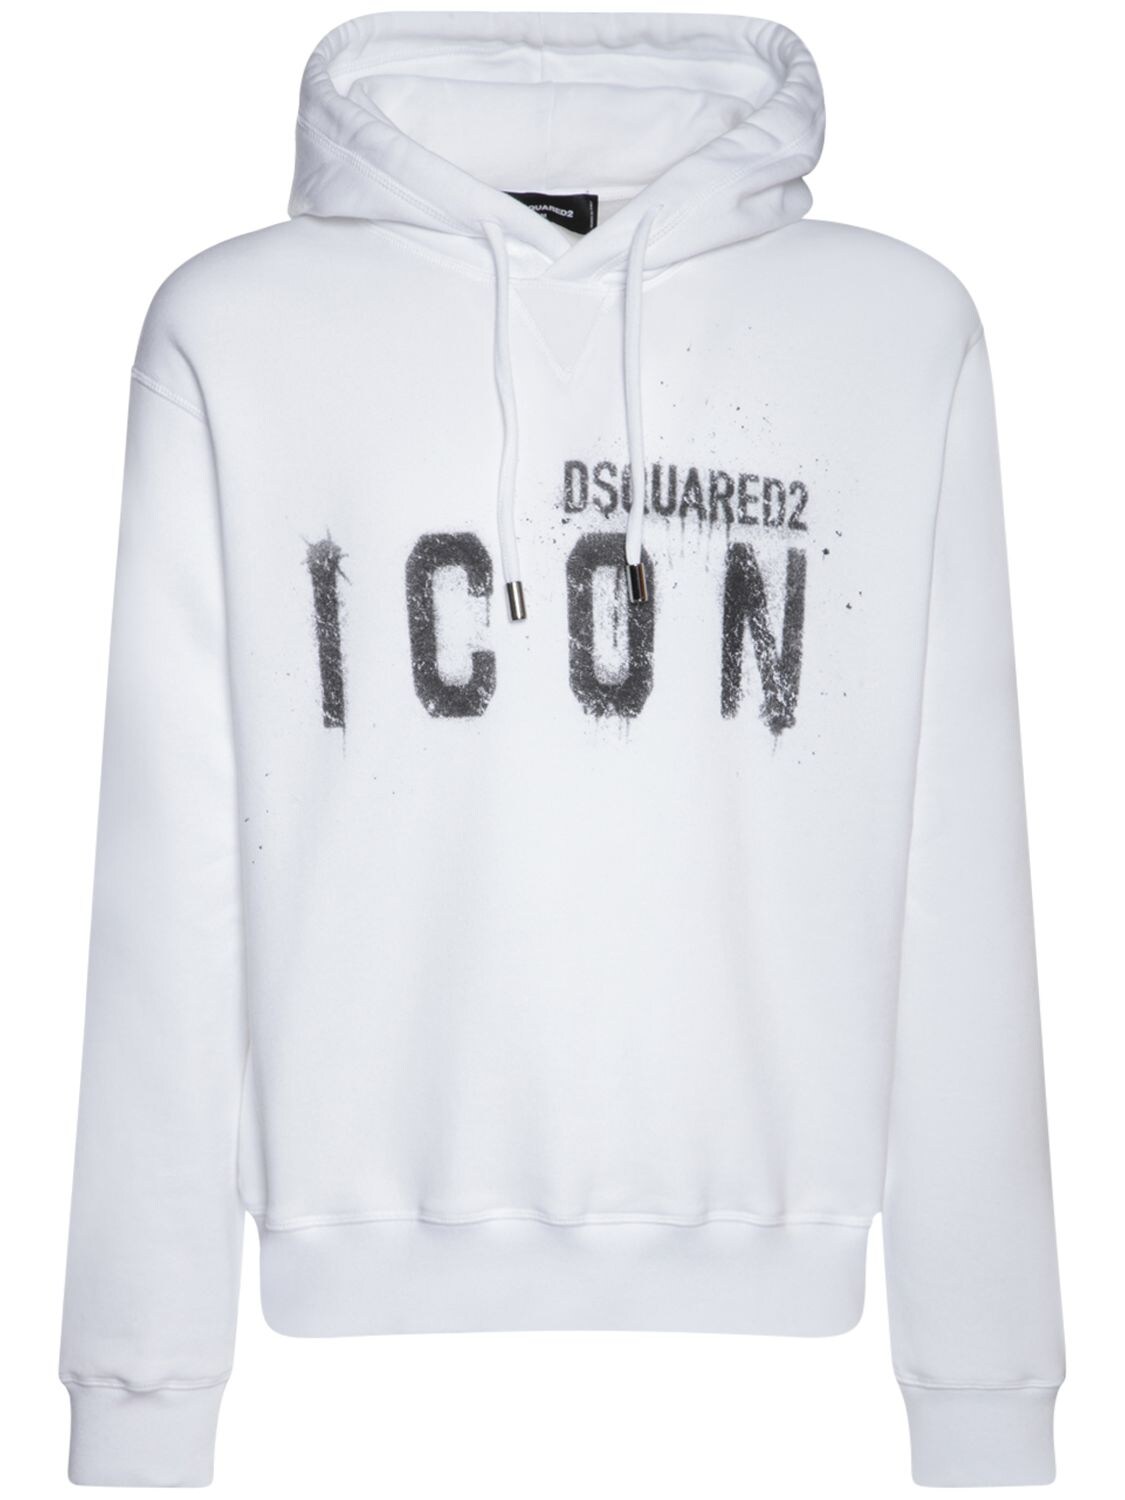 DSQUARED2 ICON SPRAY PRINT COTTON JERSEY HOODIE,75IS3C023-MTAW0